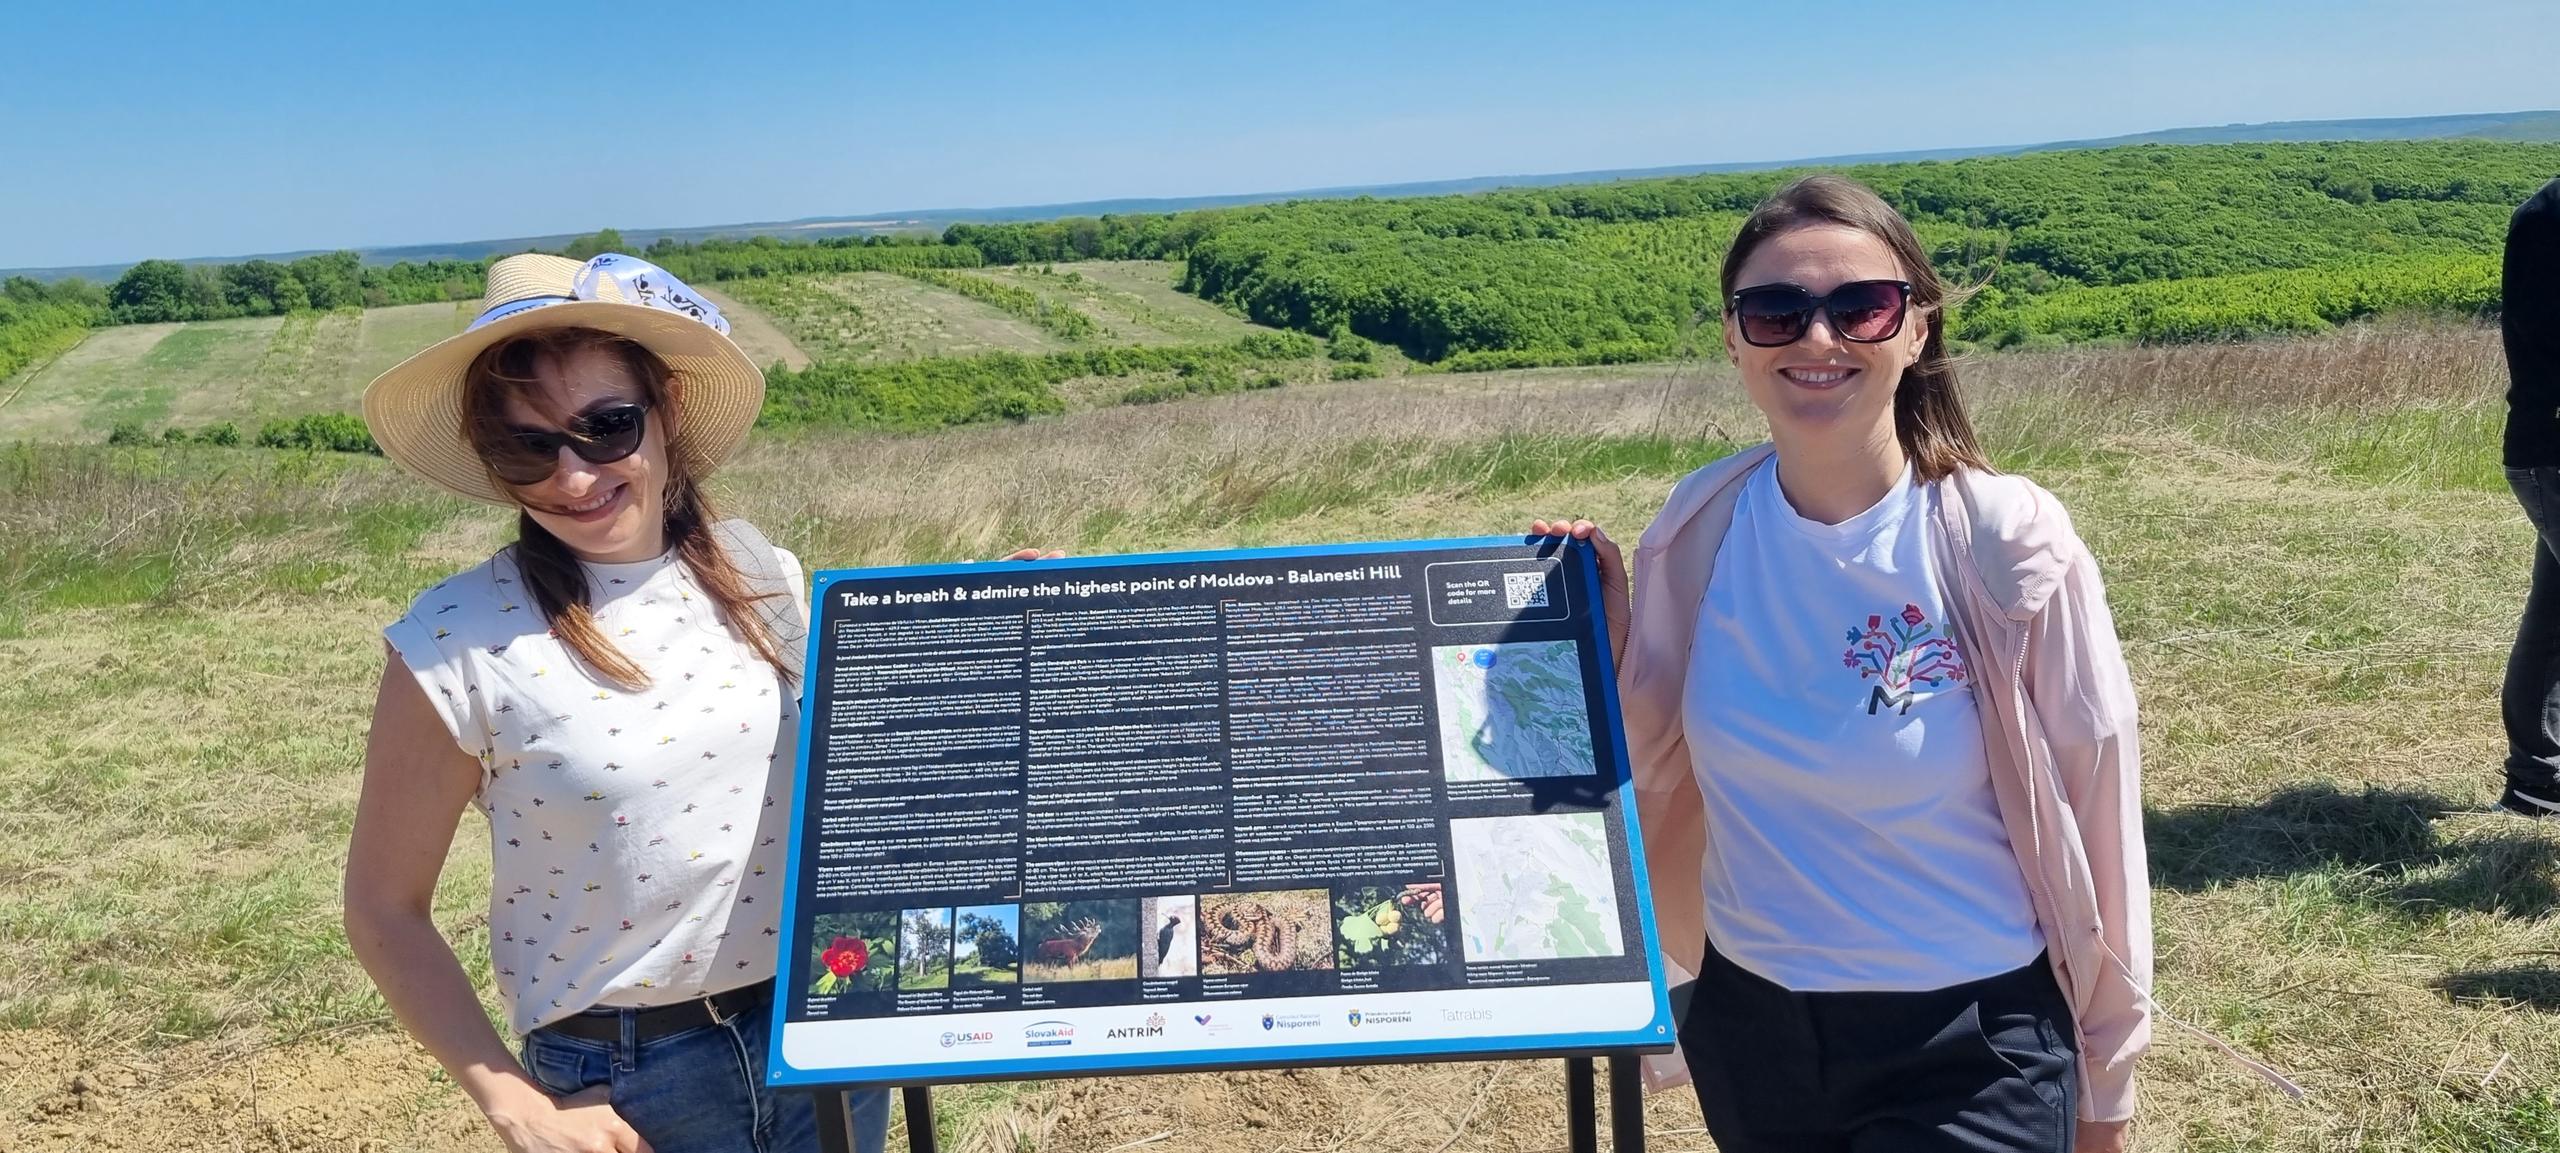 Two woman in the countryside, standing in front of an informational board